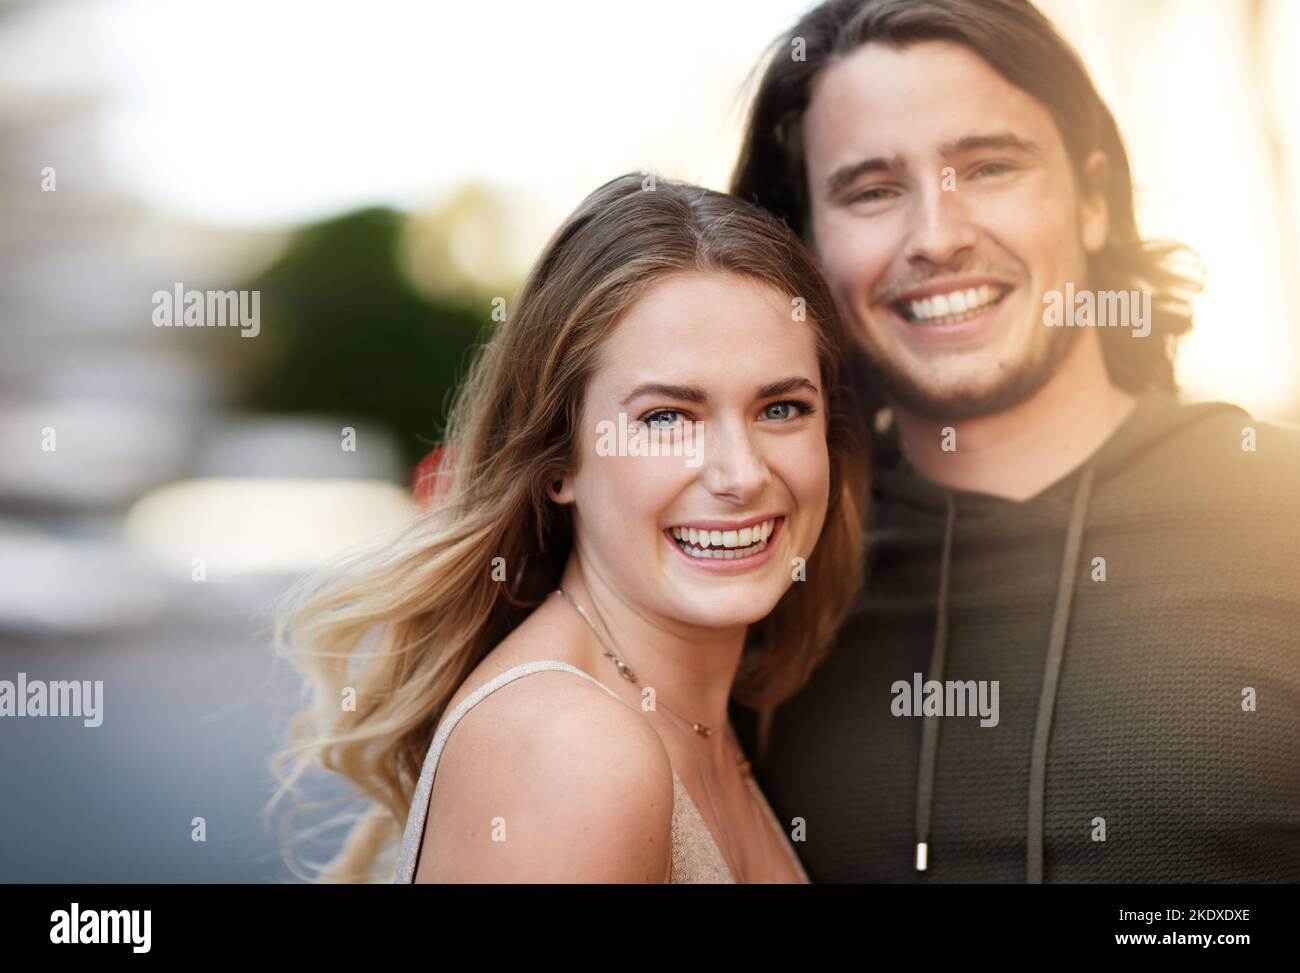 The bond of love. Portrait of a happy young couple out in the city together. Stock Photo